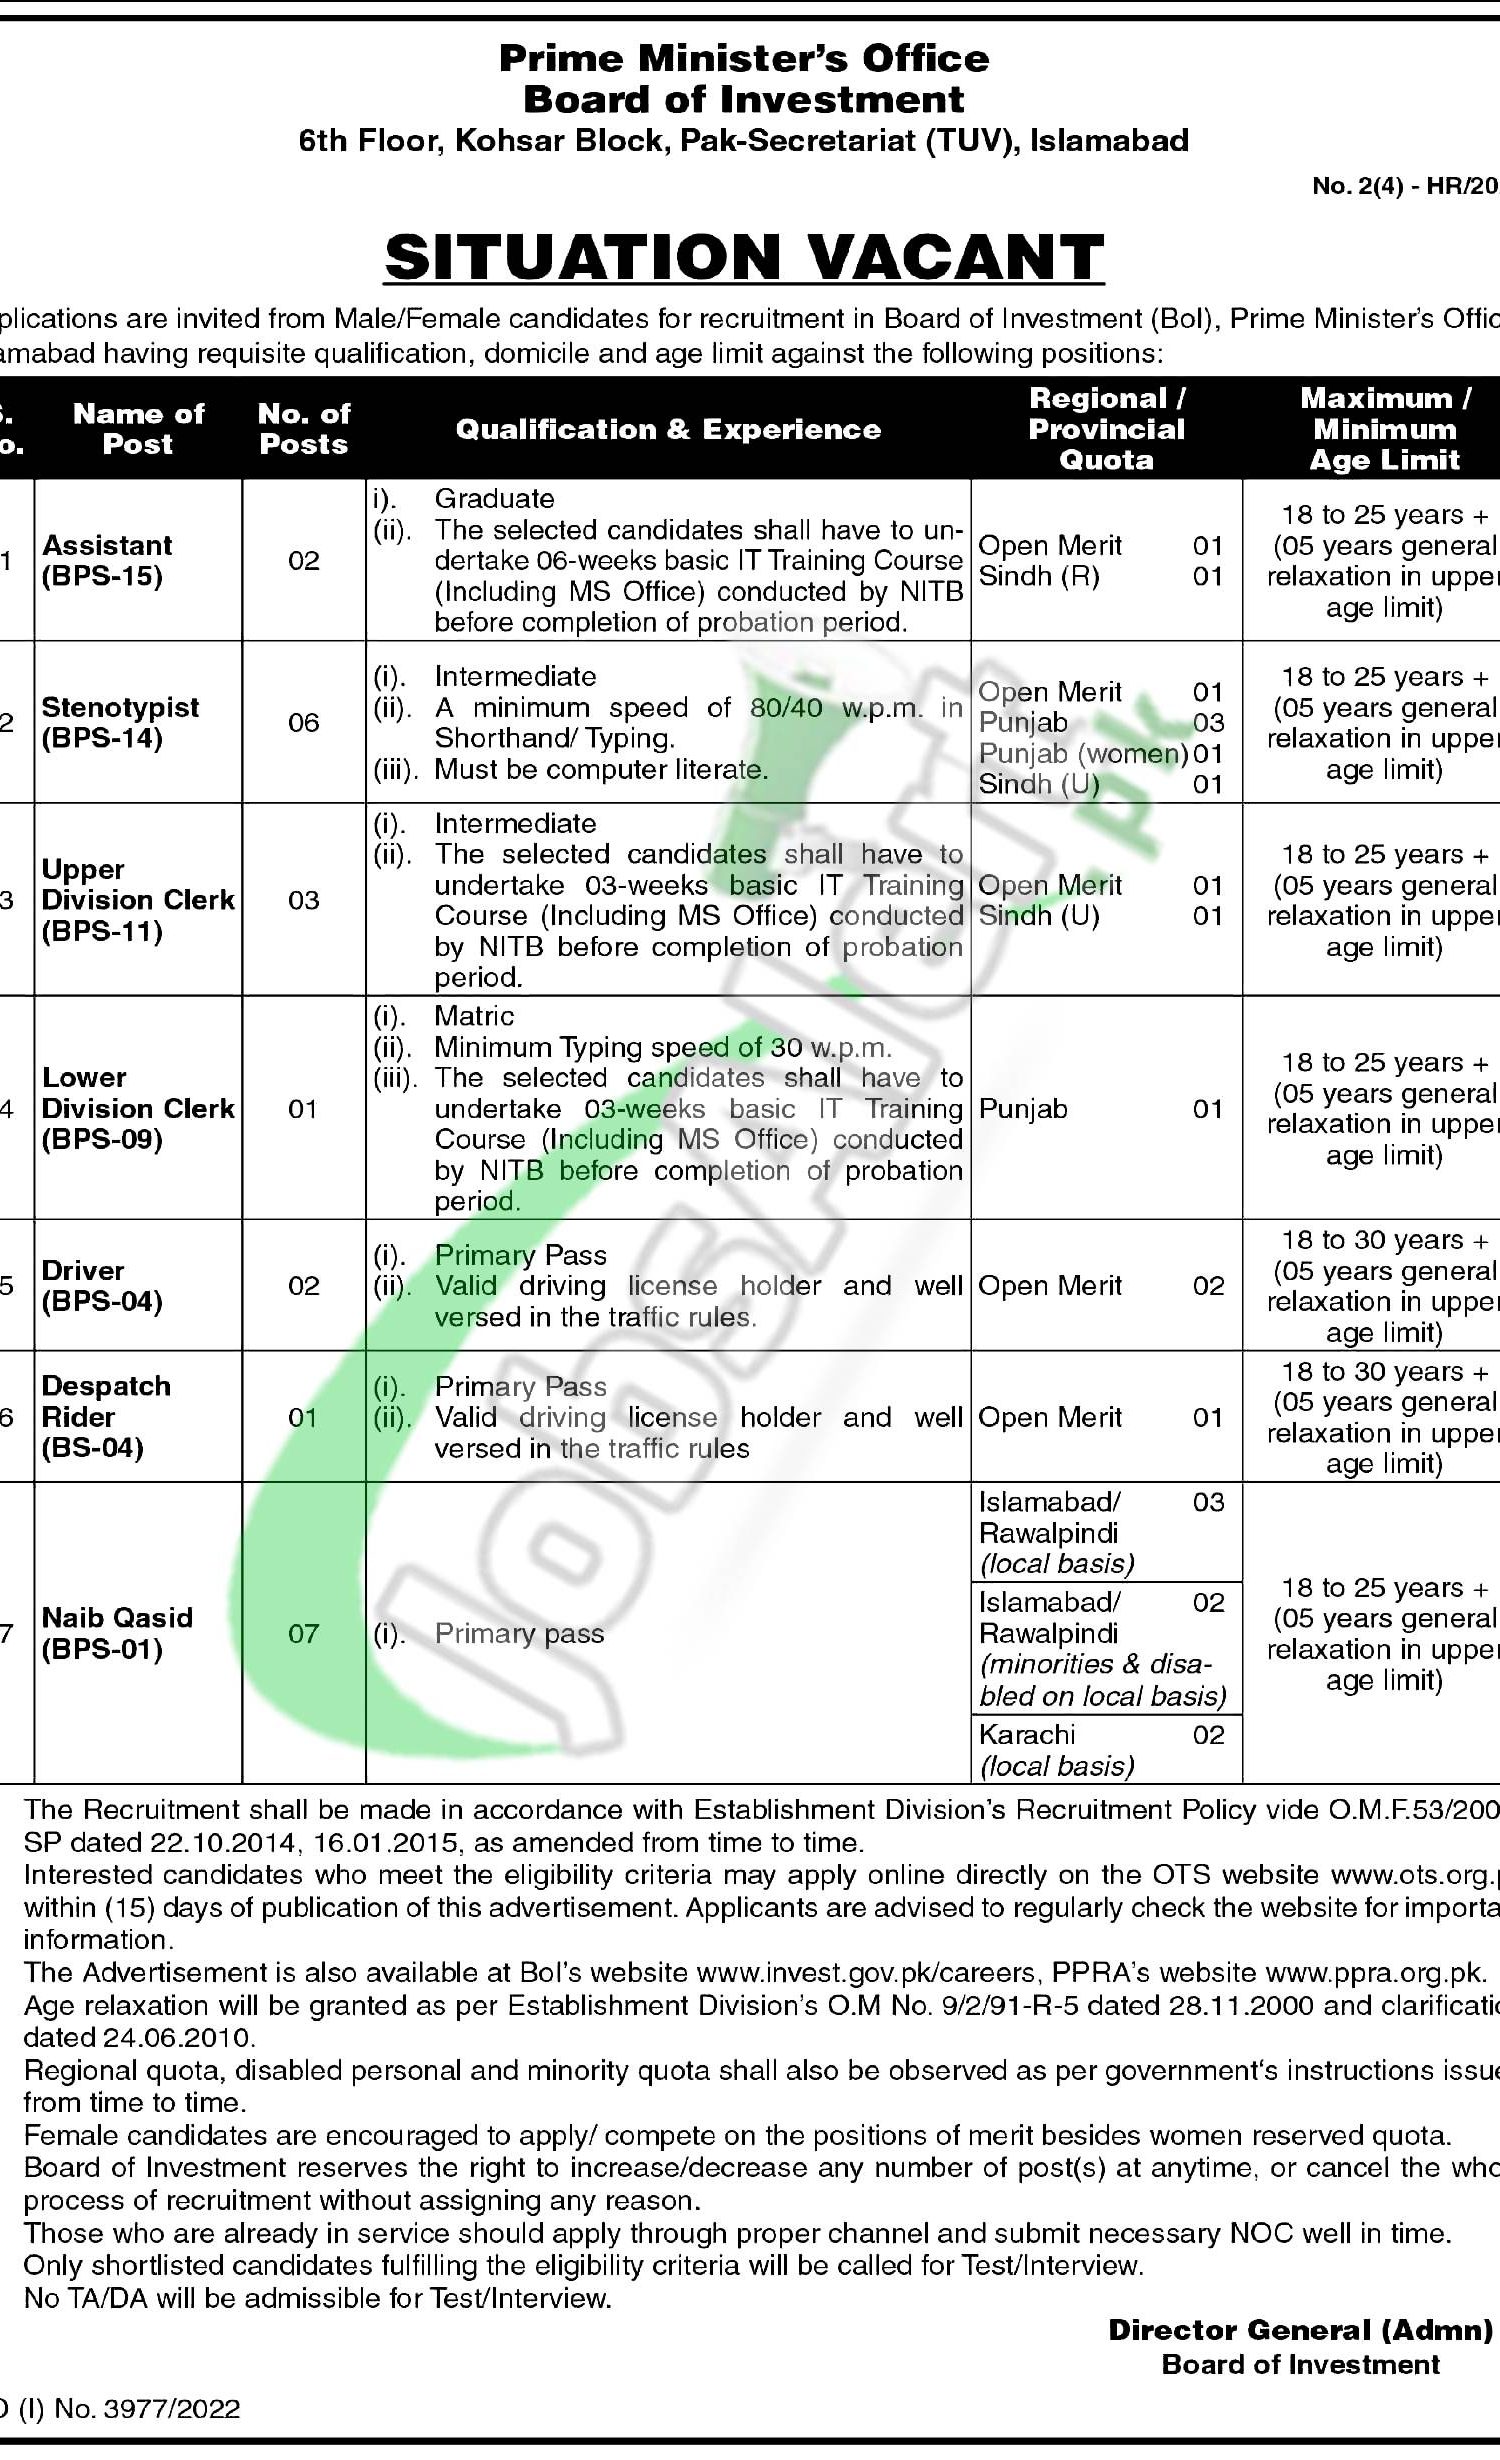 Prime Minister Office Islamabad Jobs